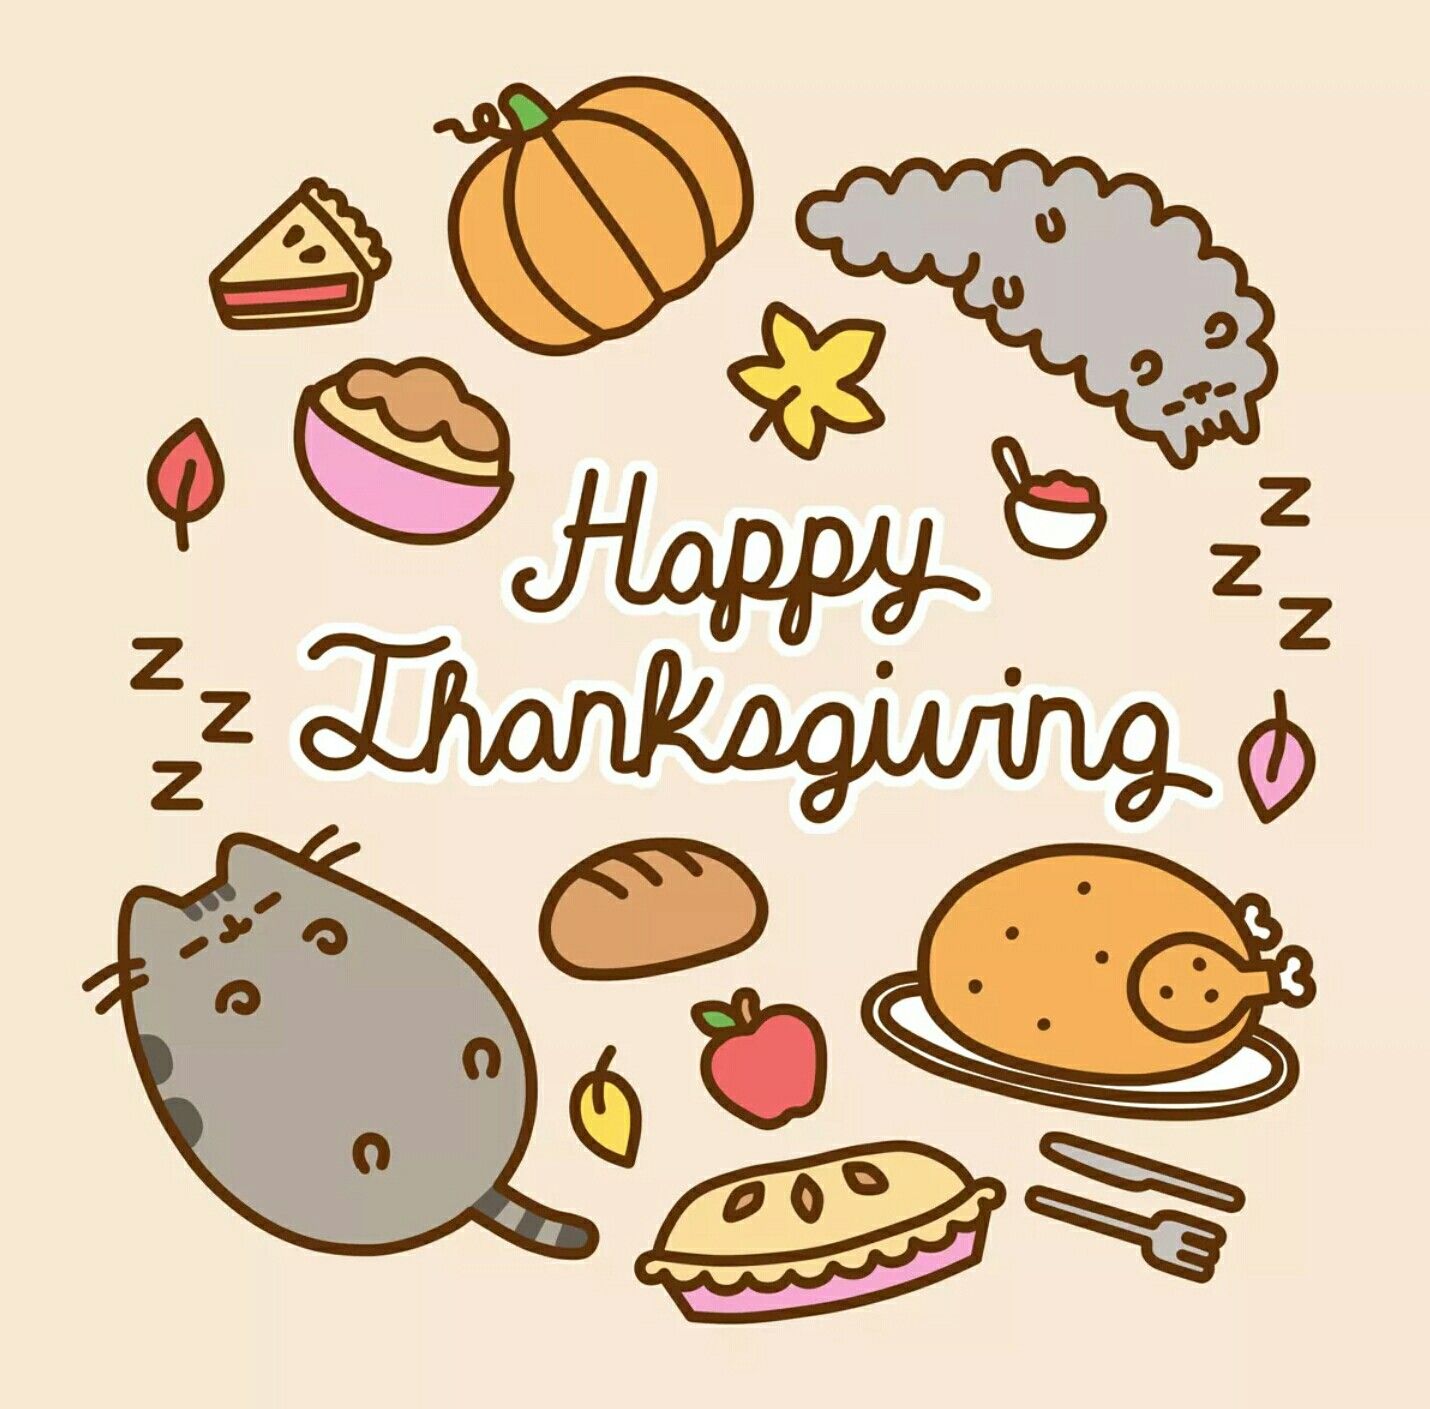 Thanksgiving clipart cute. Pusheen the cat happy - Thanksgiving